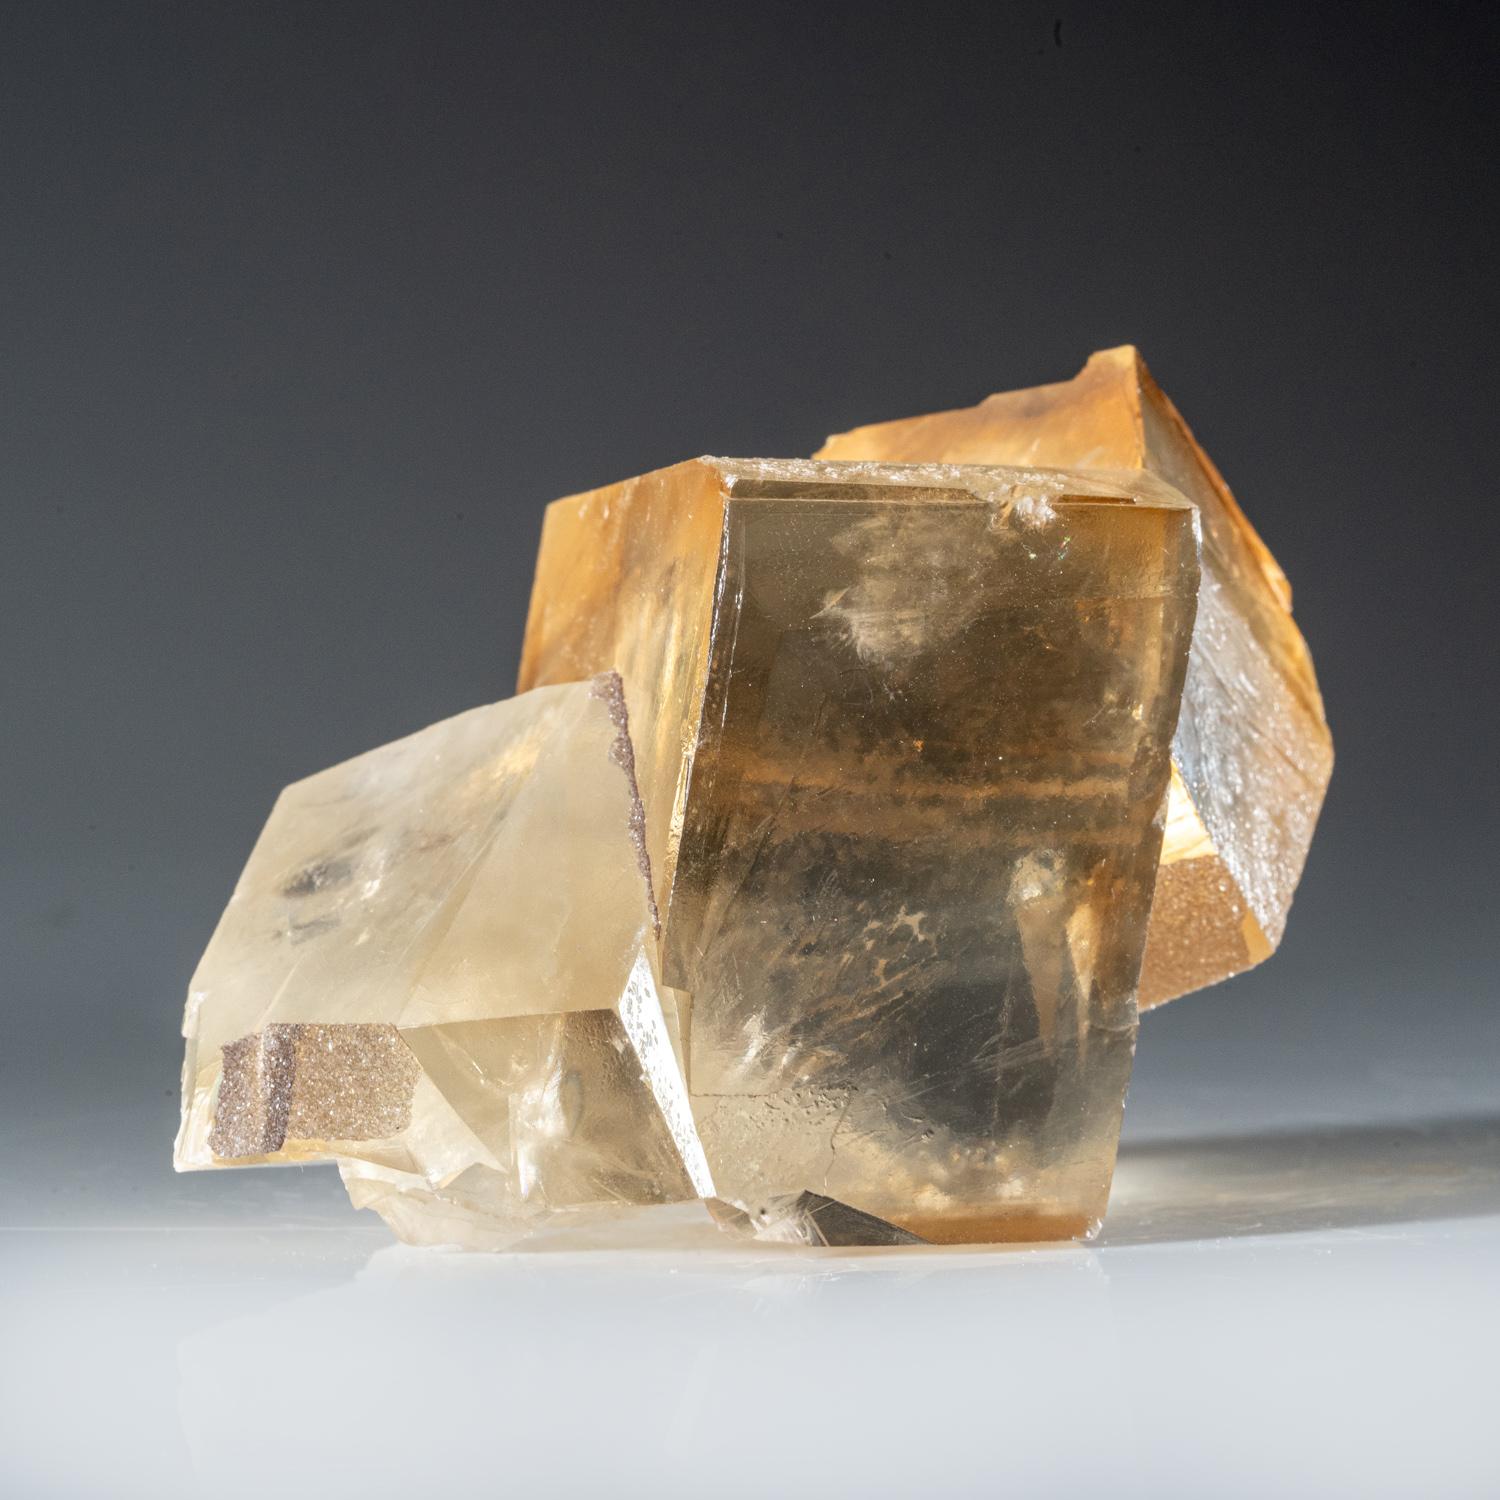 Contemporary Twinned Golden Calcite from Nasik District, Maharashtra, India